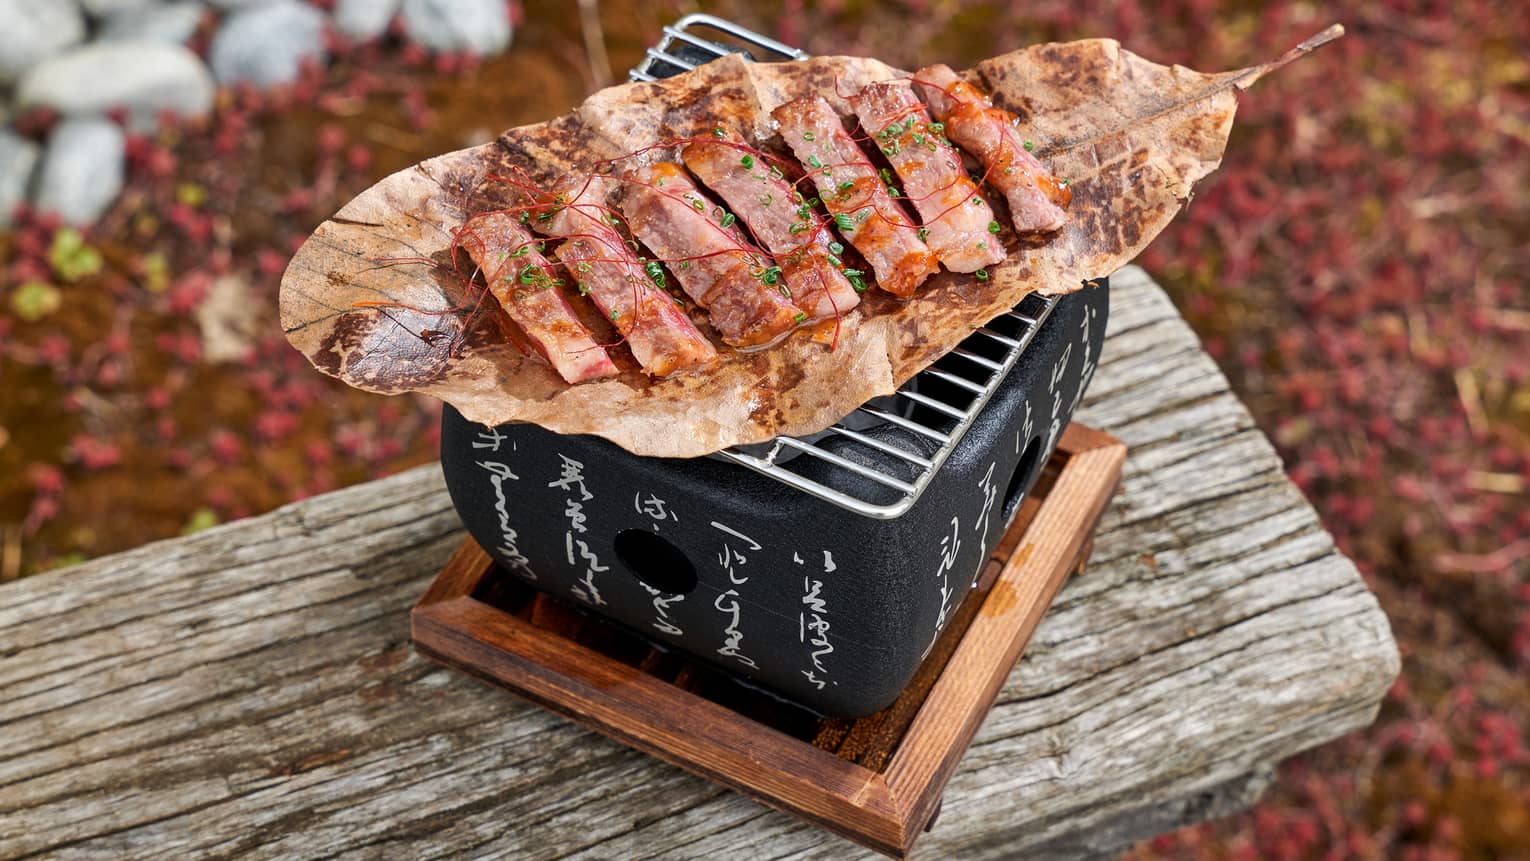 Sliced Wagyu beef on brown leaf atop square black grill